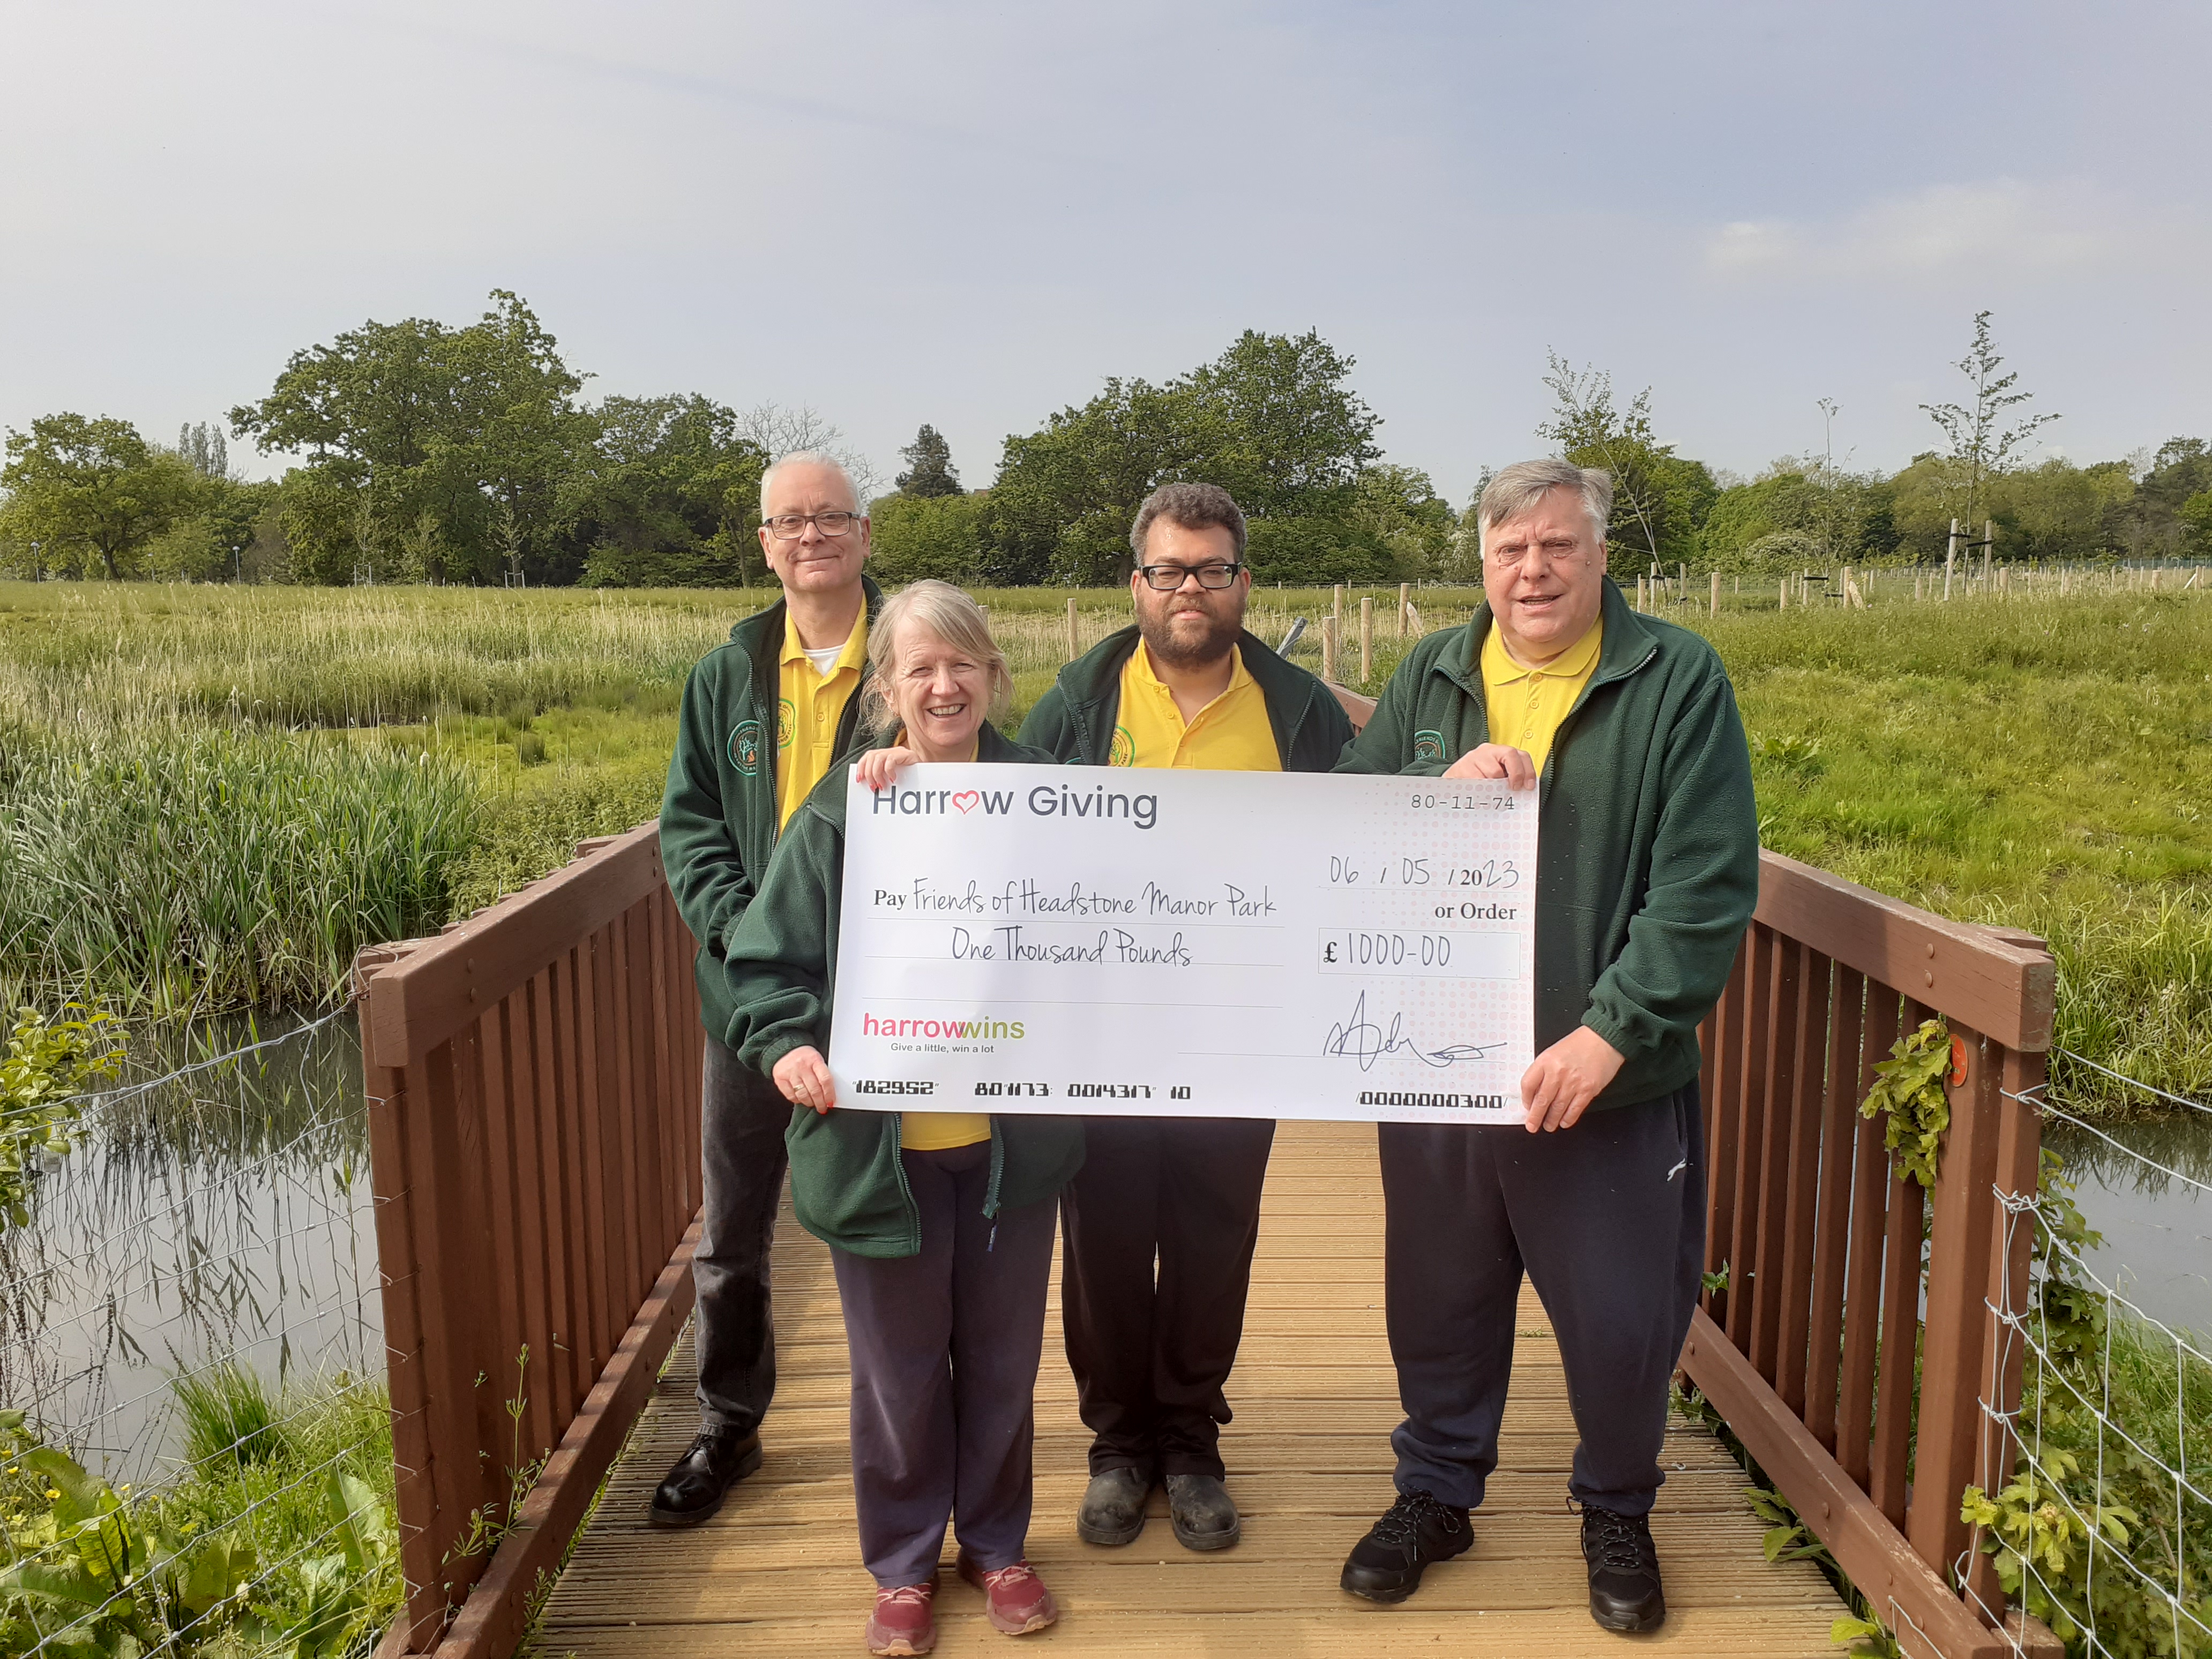 Friends of Headstone Manor presented with a cheque